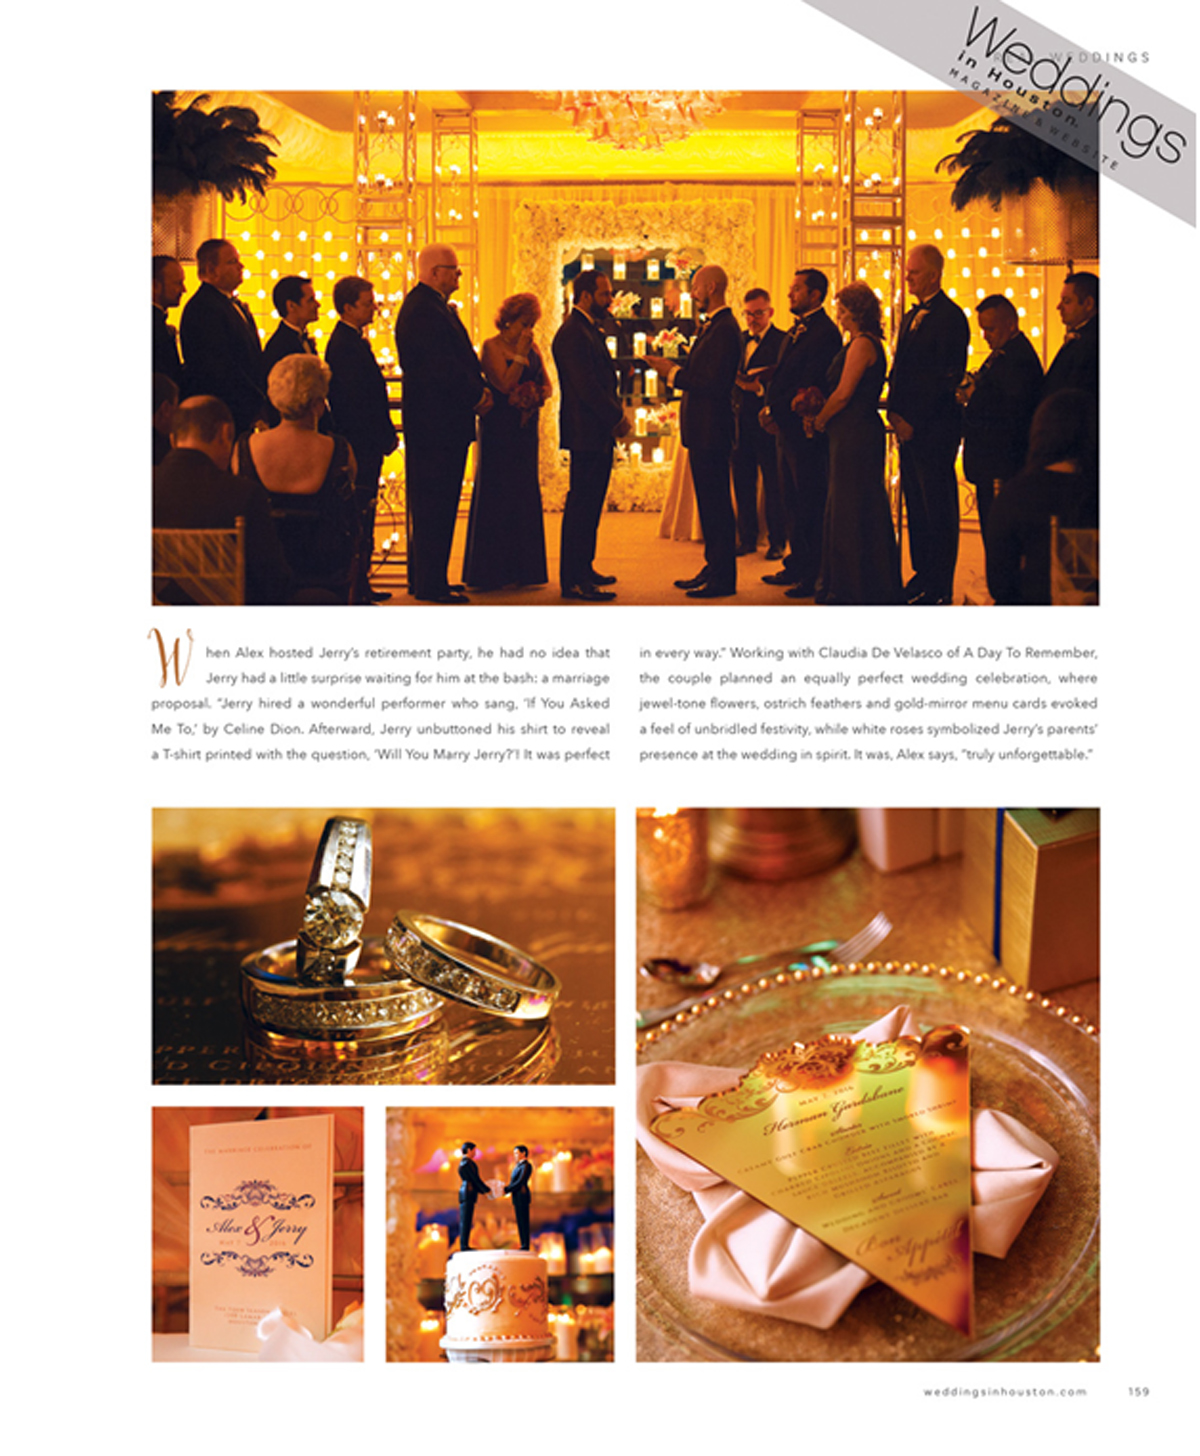 WiH_Wedding Feature_Page 2.jpg